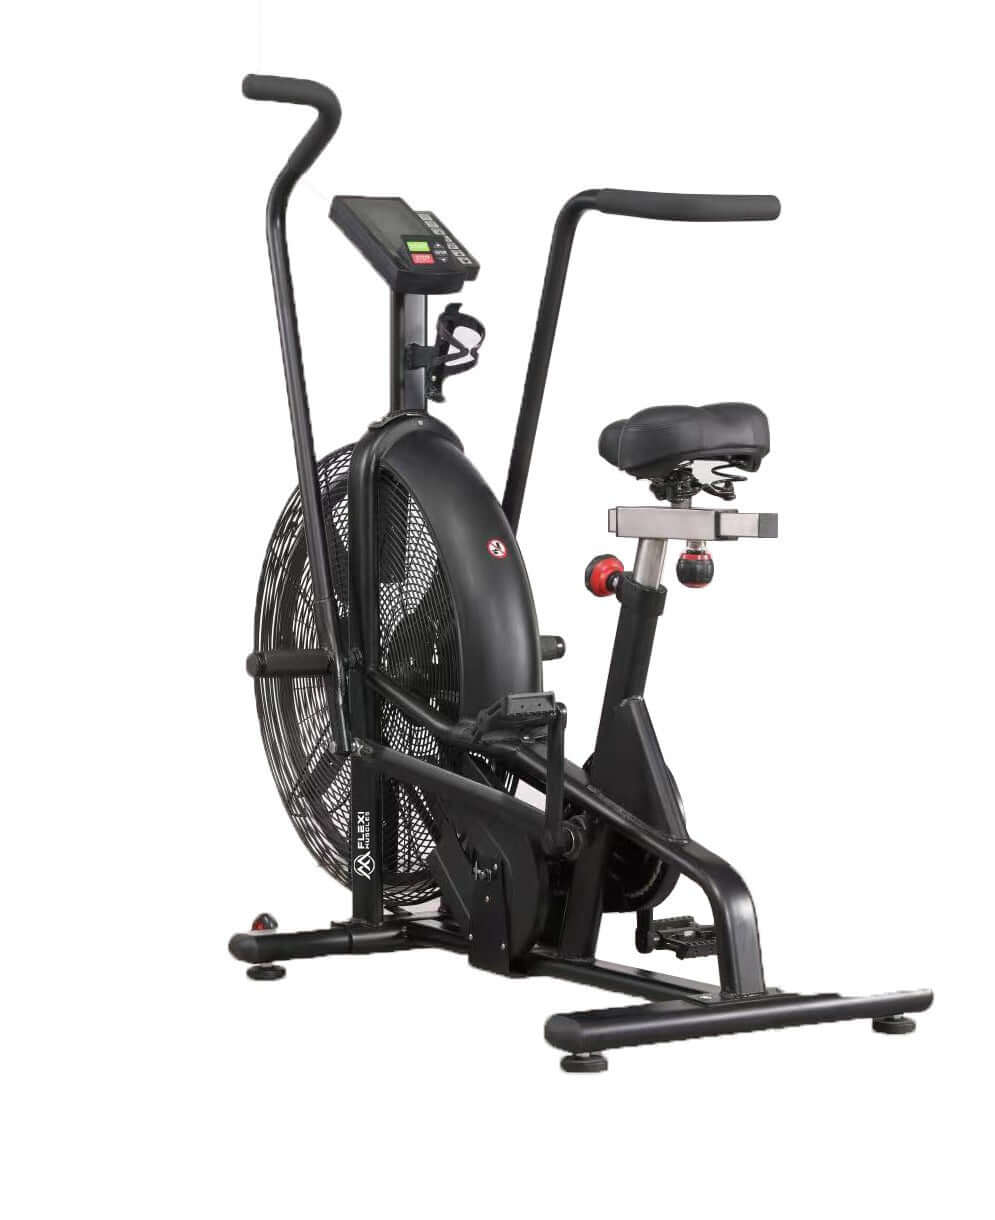 Flexi Muscles - Air-Resistance Exercise Fan Bike with for Indoor Cycling